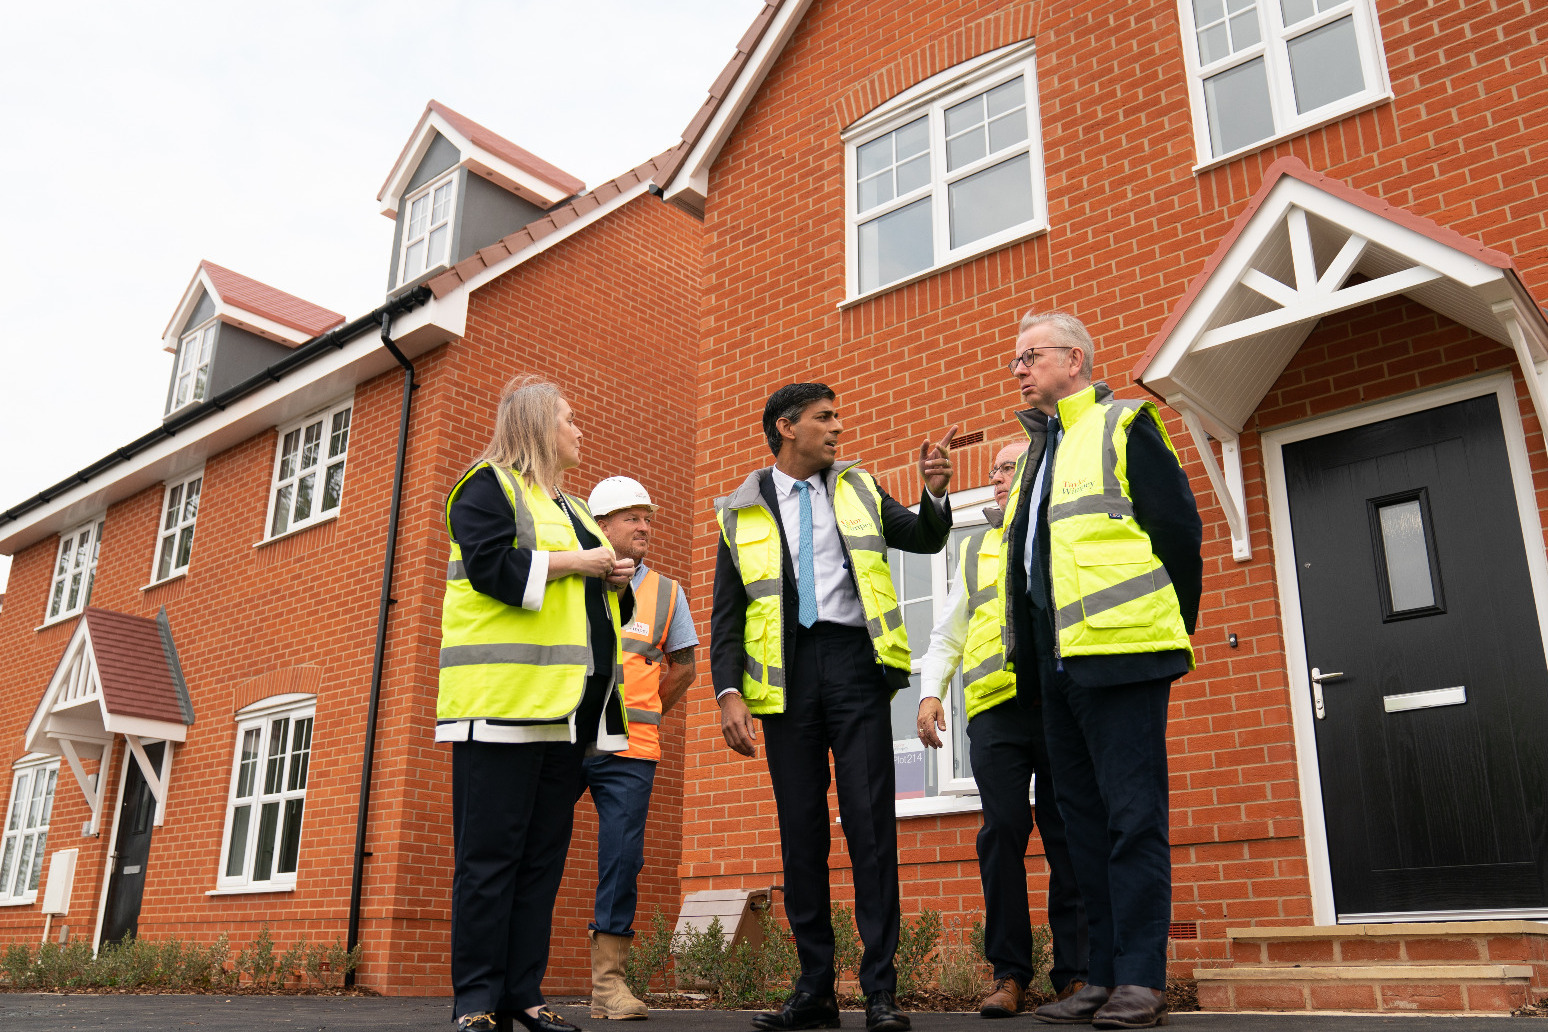 Campaigners criticise plans to boost housebuilding by relaxing environment rules 